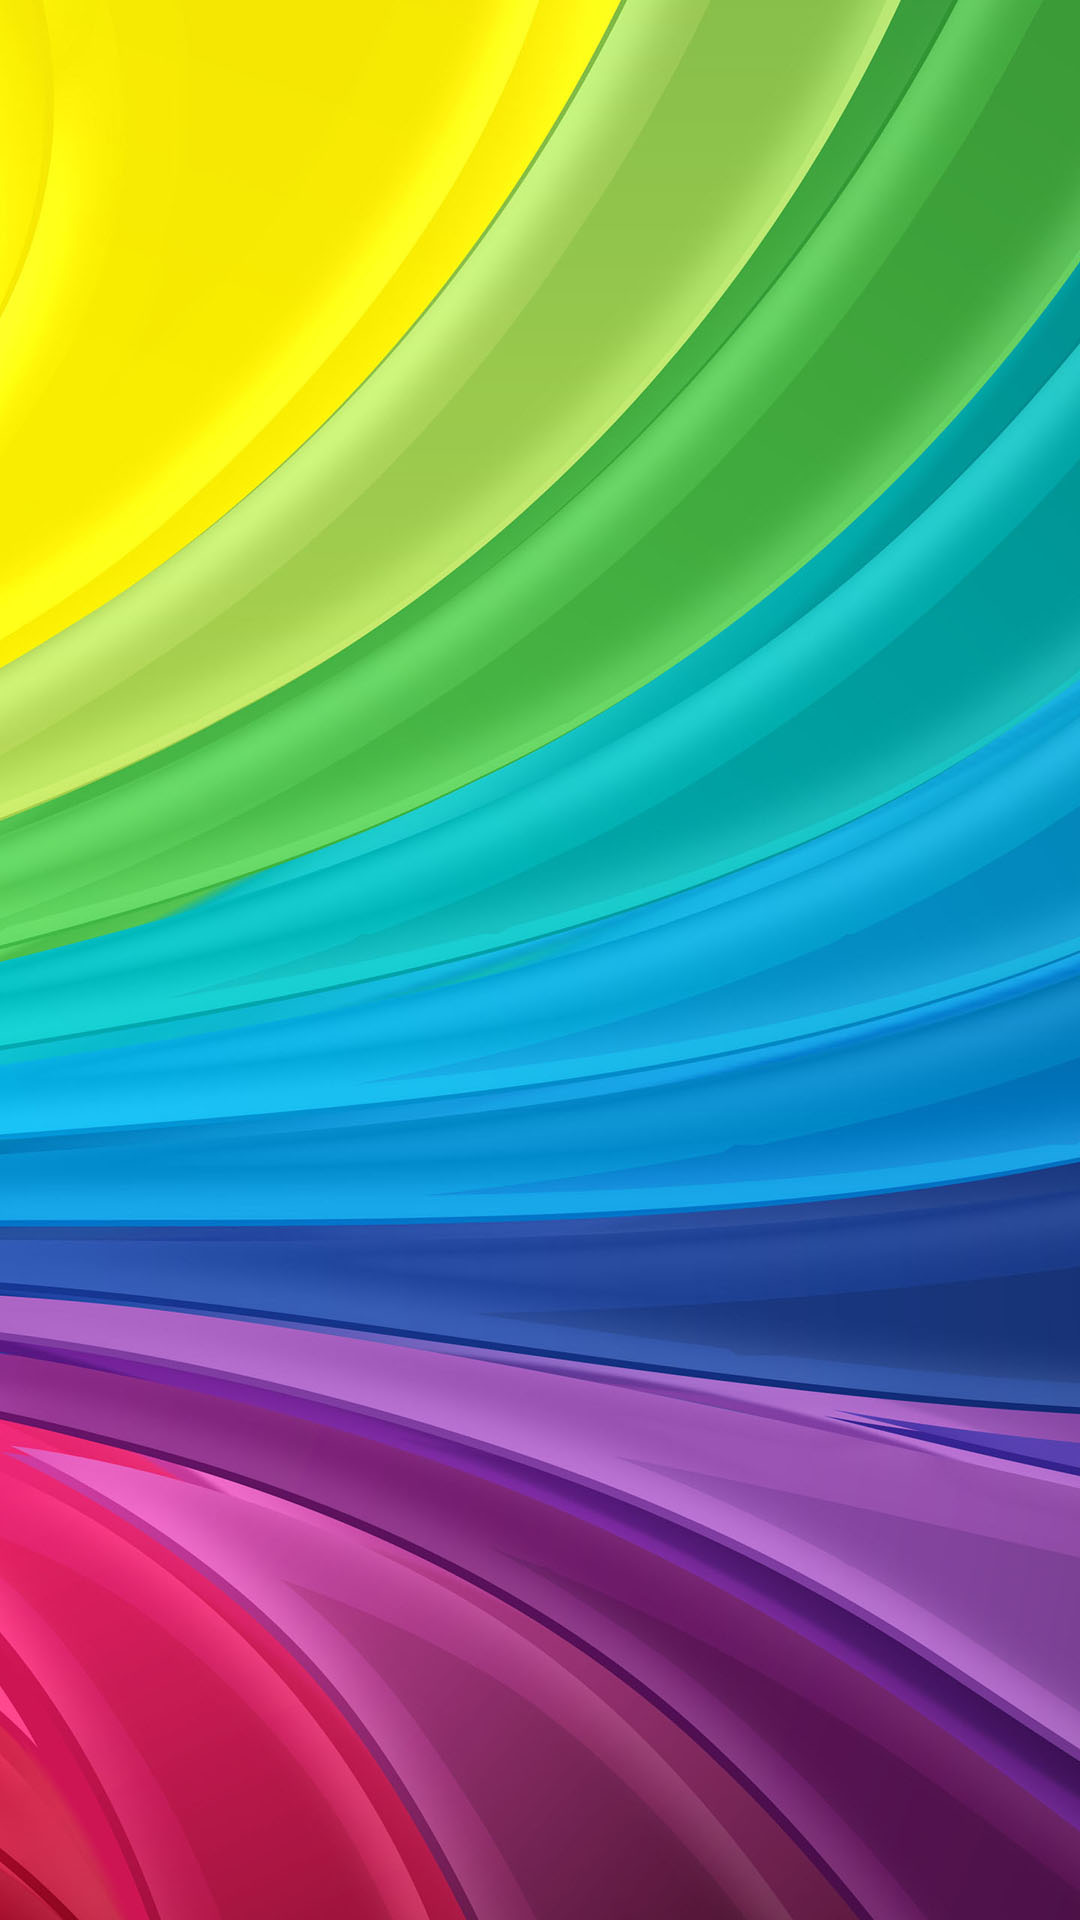 best colorful wallpapers,blue,green,aqua,purple,yellow